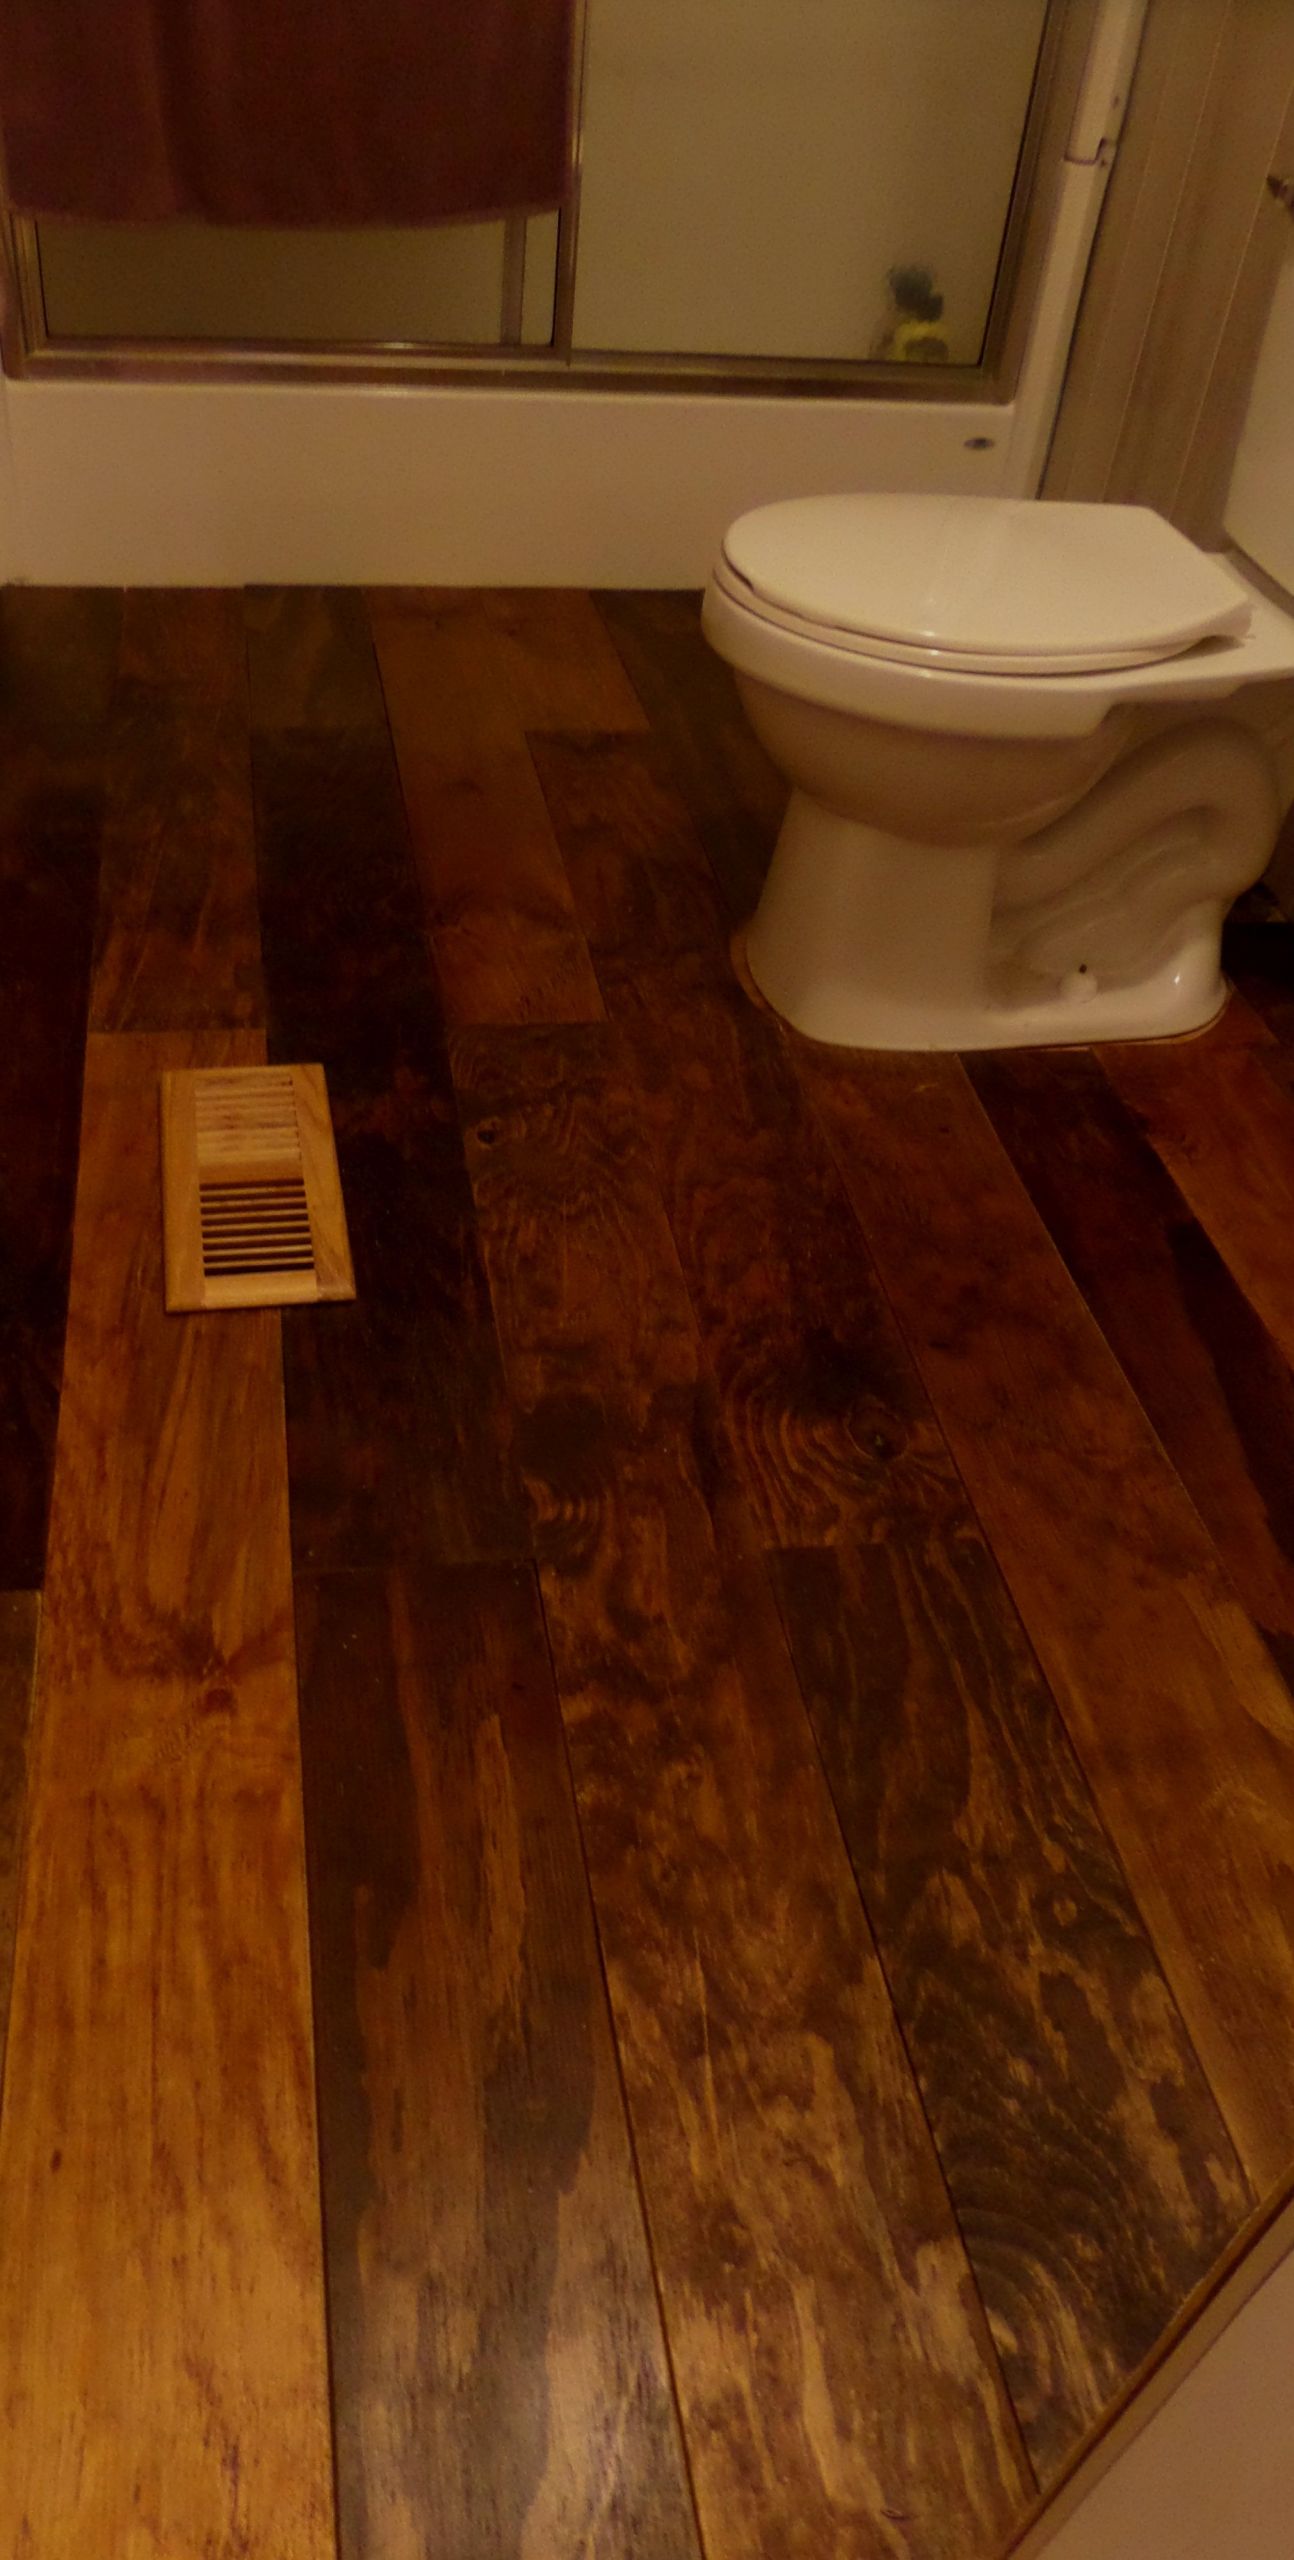 DIY Wood Plank Flooring
 The DIY wood plank flooring that hubby and I put in the